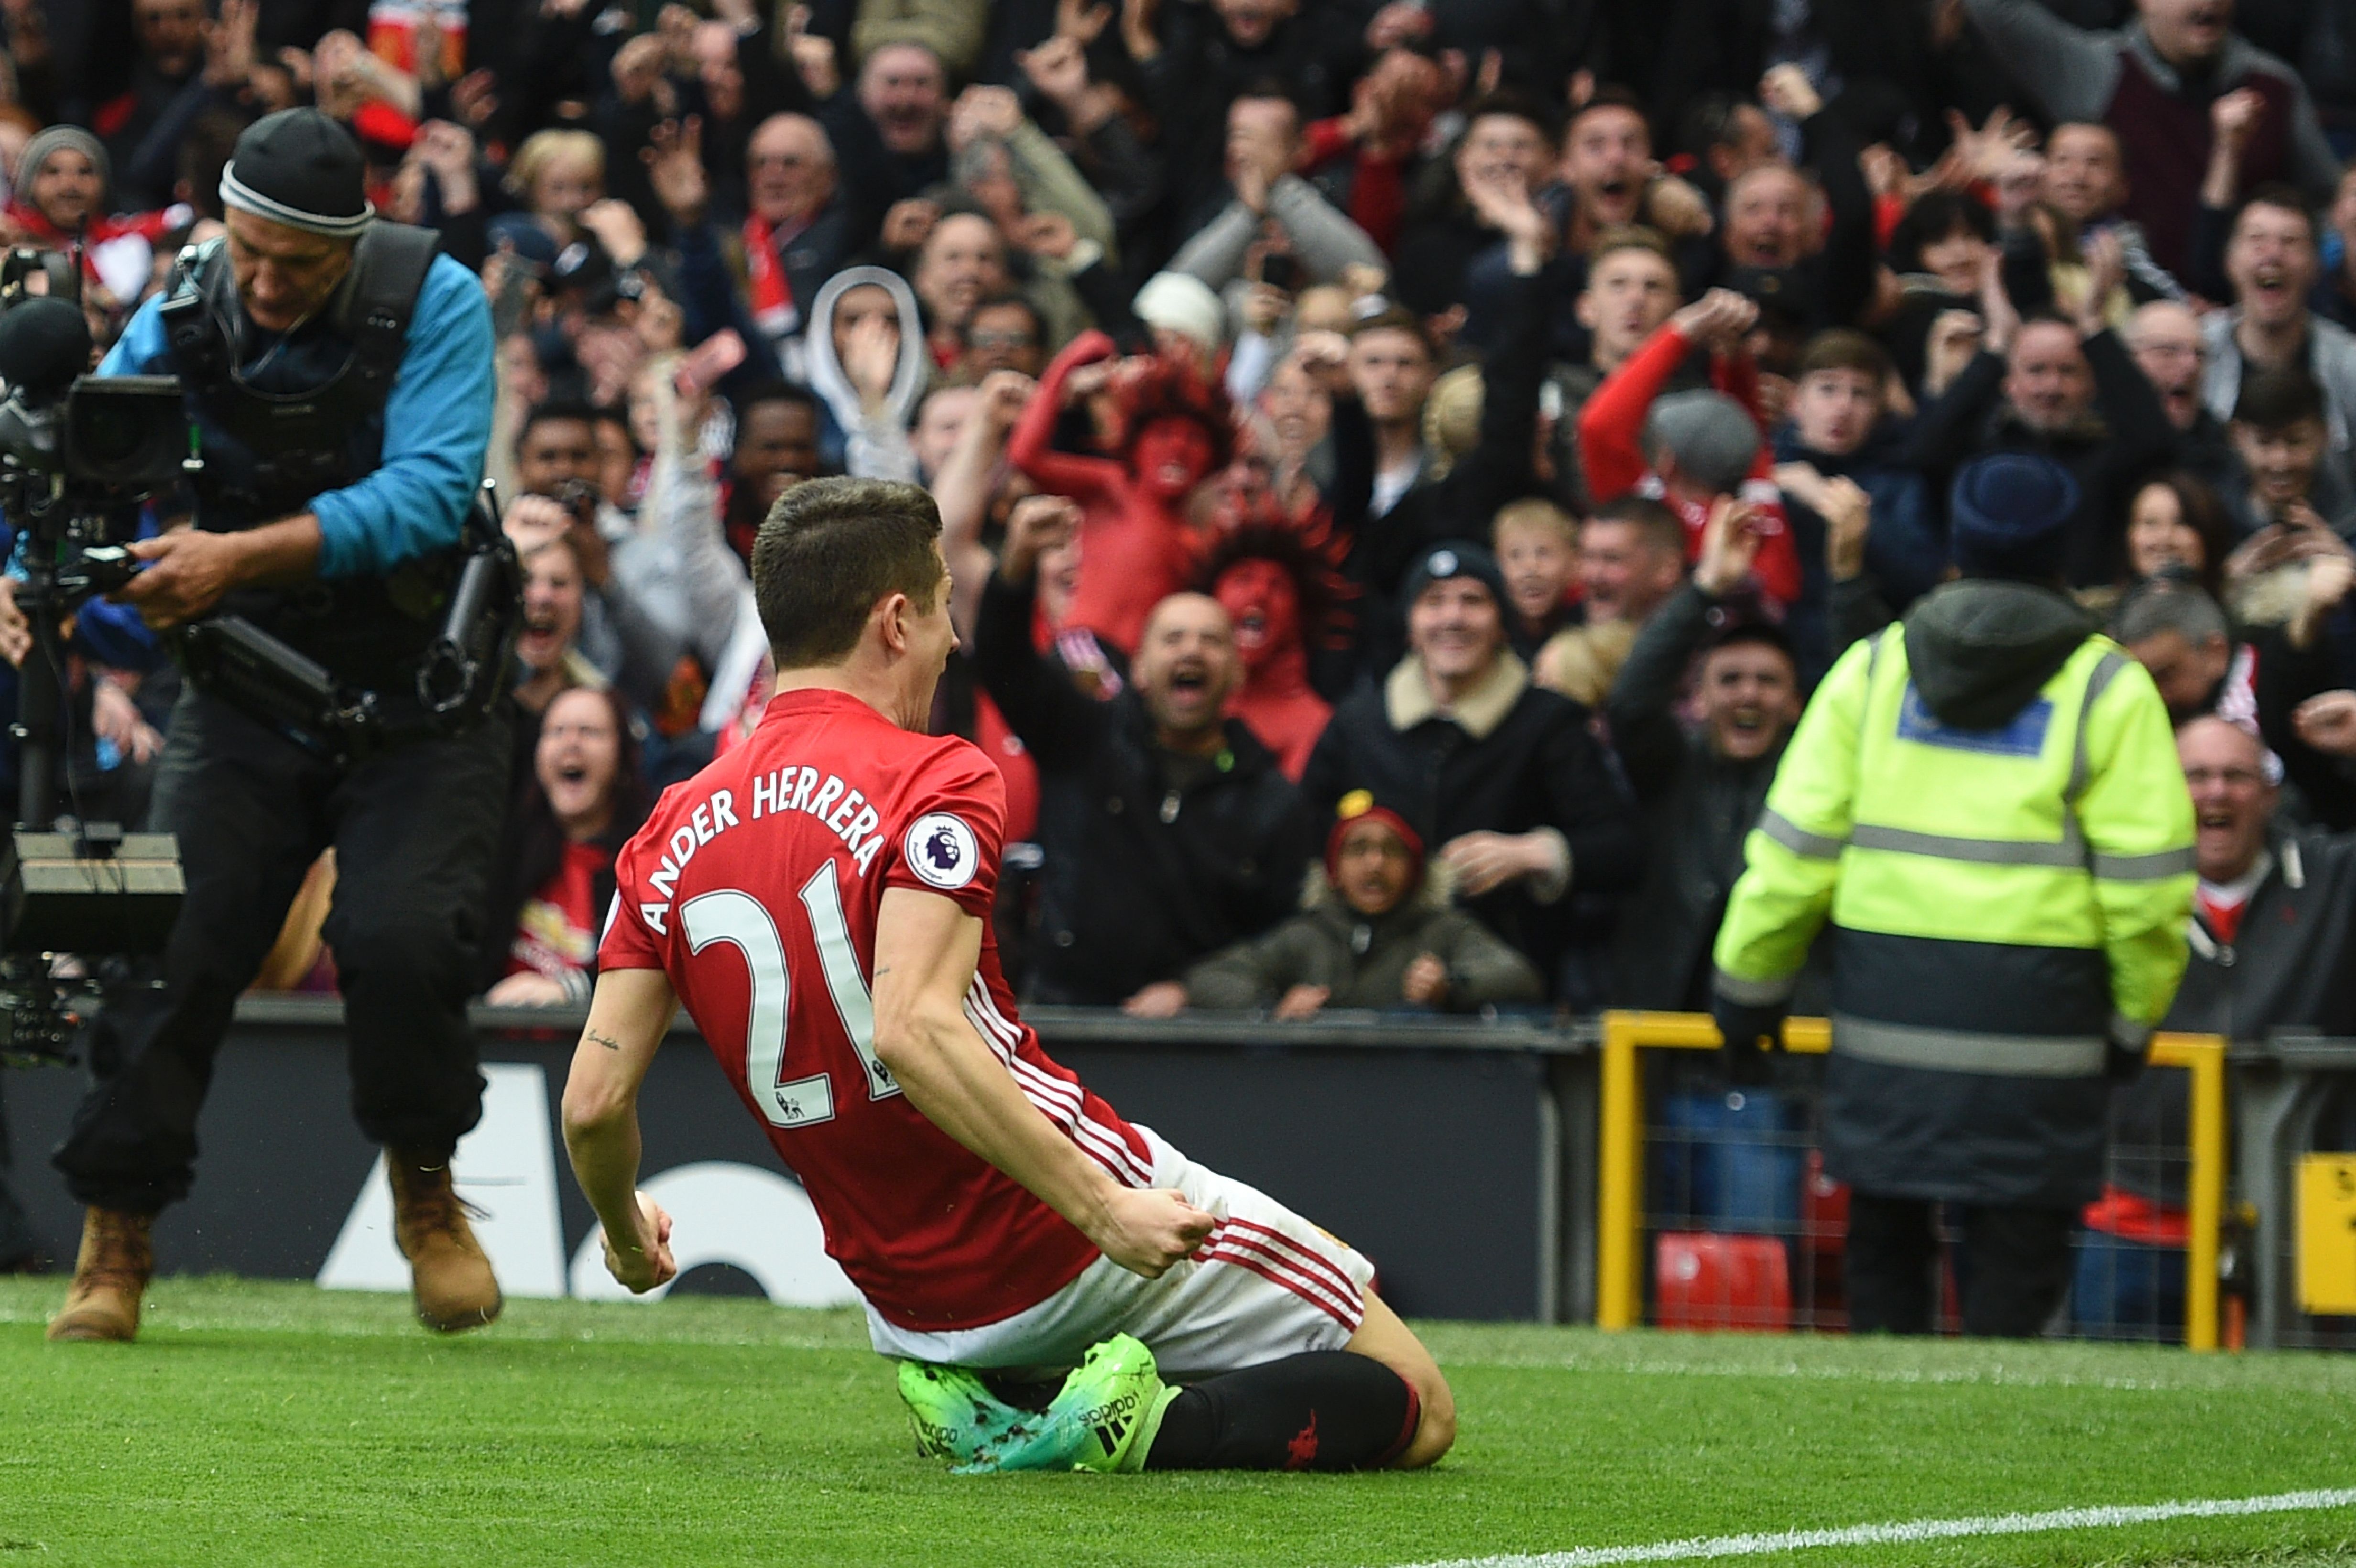 Manchester United's Spanish midfielder Ander Herrera celebrates scoring their second goal during the English Premier League football match between Manchester United and Chelsea at Old Trafford in Manchester, north west England, on April 16, 2017. / AFP PHOTO / Oli SCARFF / RESTRICTED TO EDITORIAL USE. No use with unauthorized audio, video, data, fixture lists, club/league logos or 'live' services. Online in-match use limited to 75 images, no video emulation. No use in betting, games or single club/league/player publications.  /         (Photo credit should read OLI SCARFF/AFP/Getty Images)